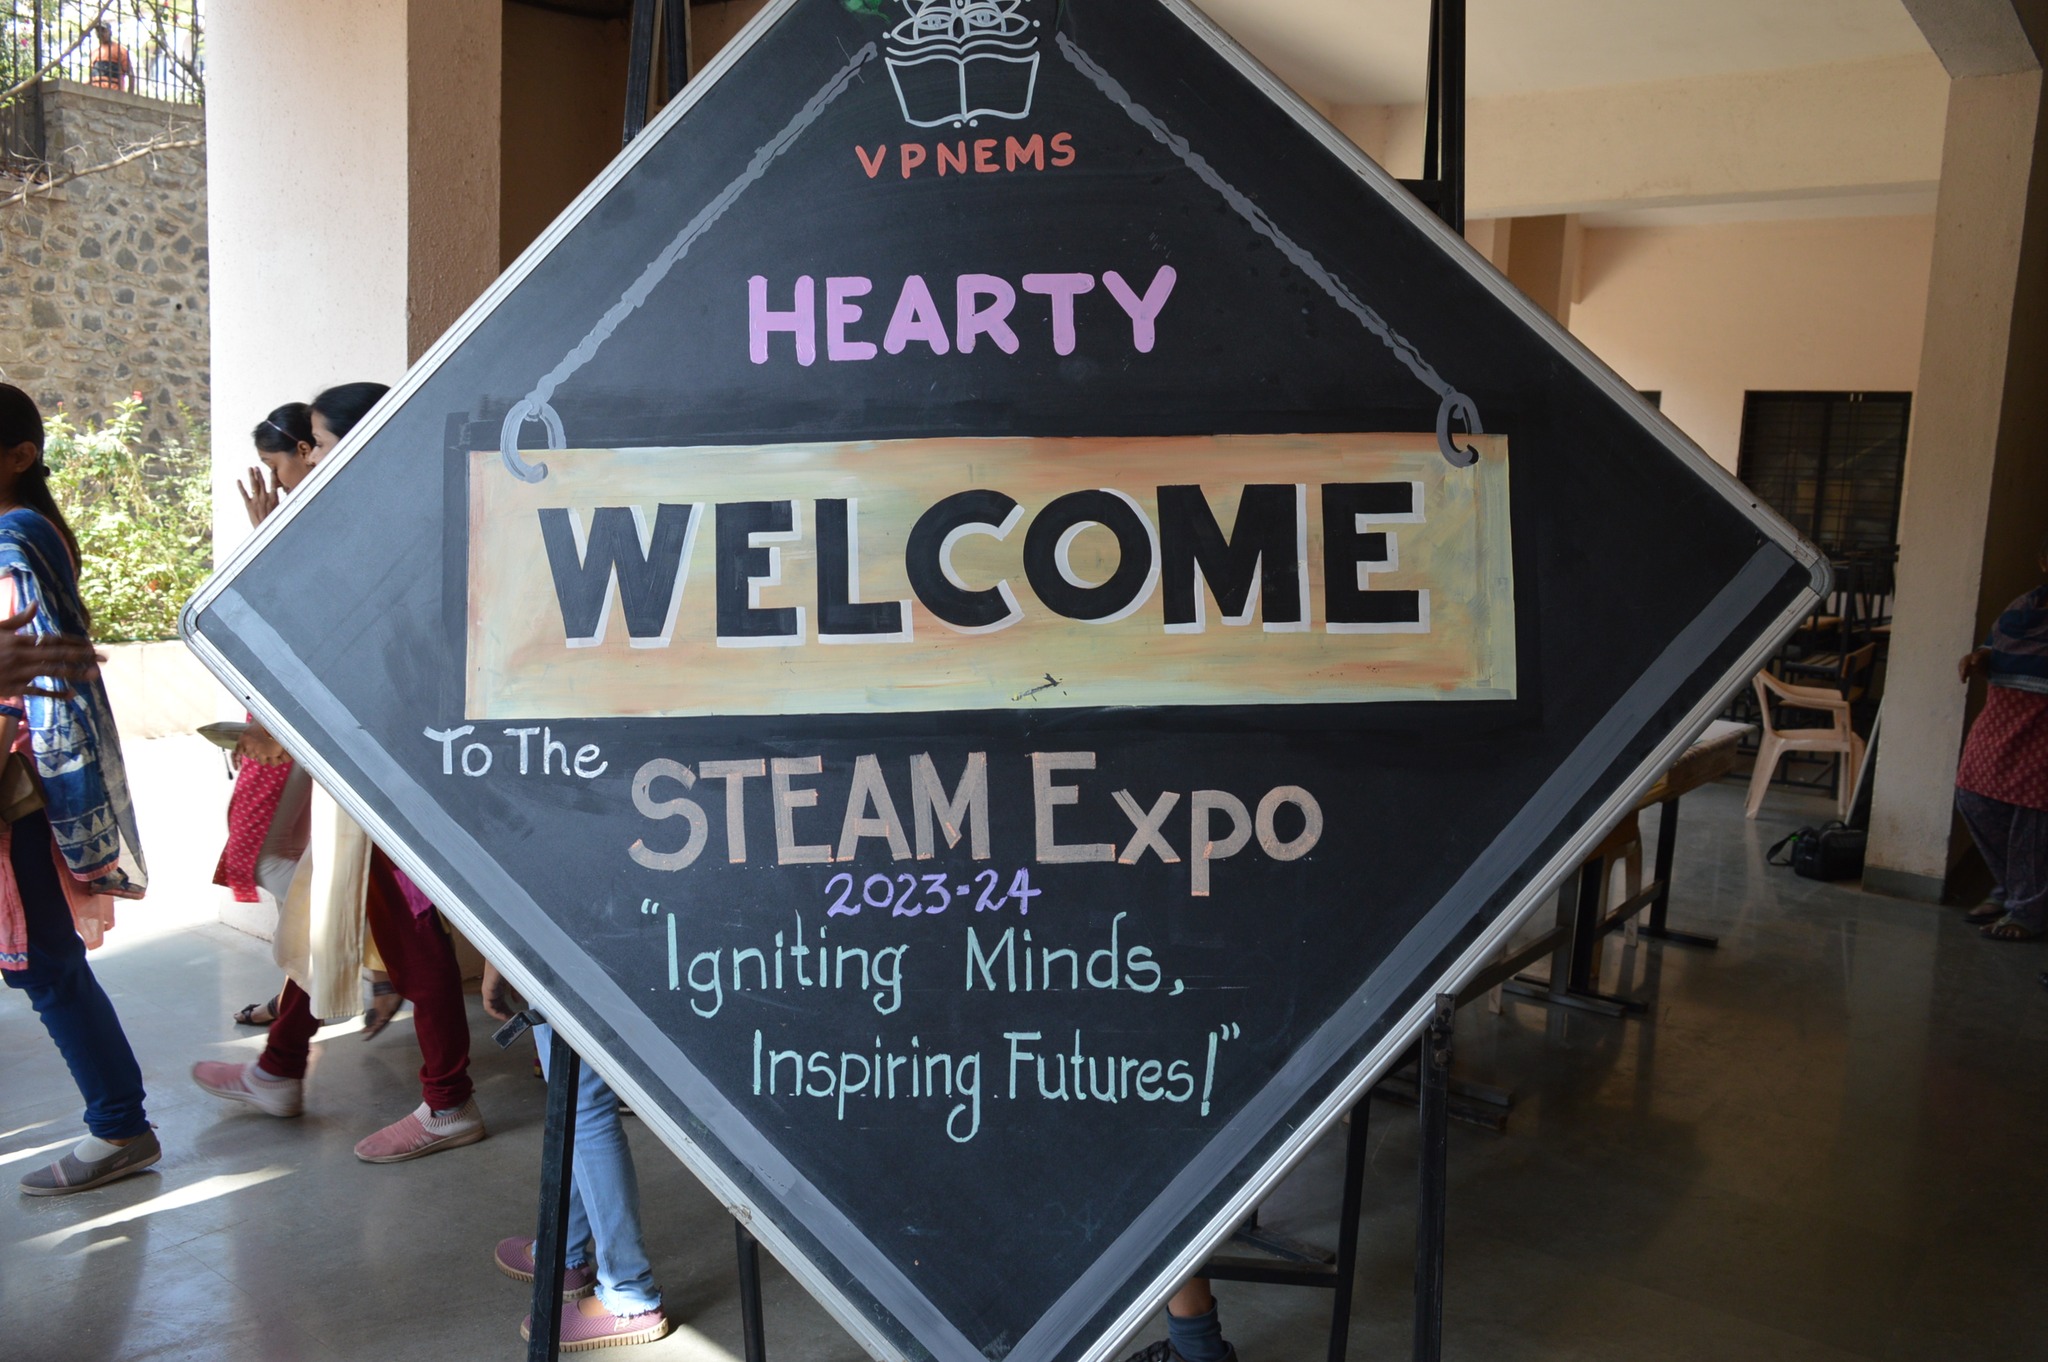 May be an image of 3 people and text that says 'VPNEMS HEARTY WELCOME To The STEAM 2023-24 Expo Igniting Minds, Inspiring Futures!'